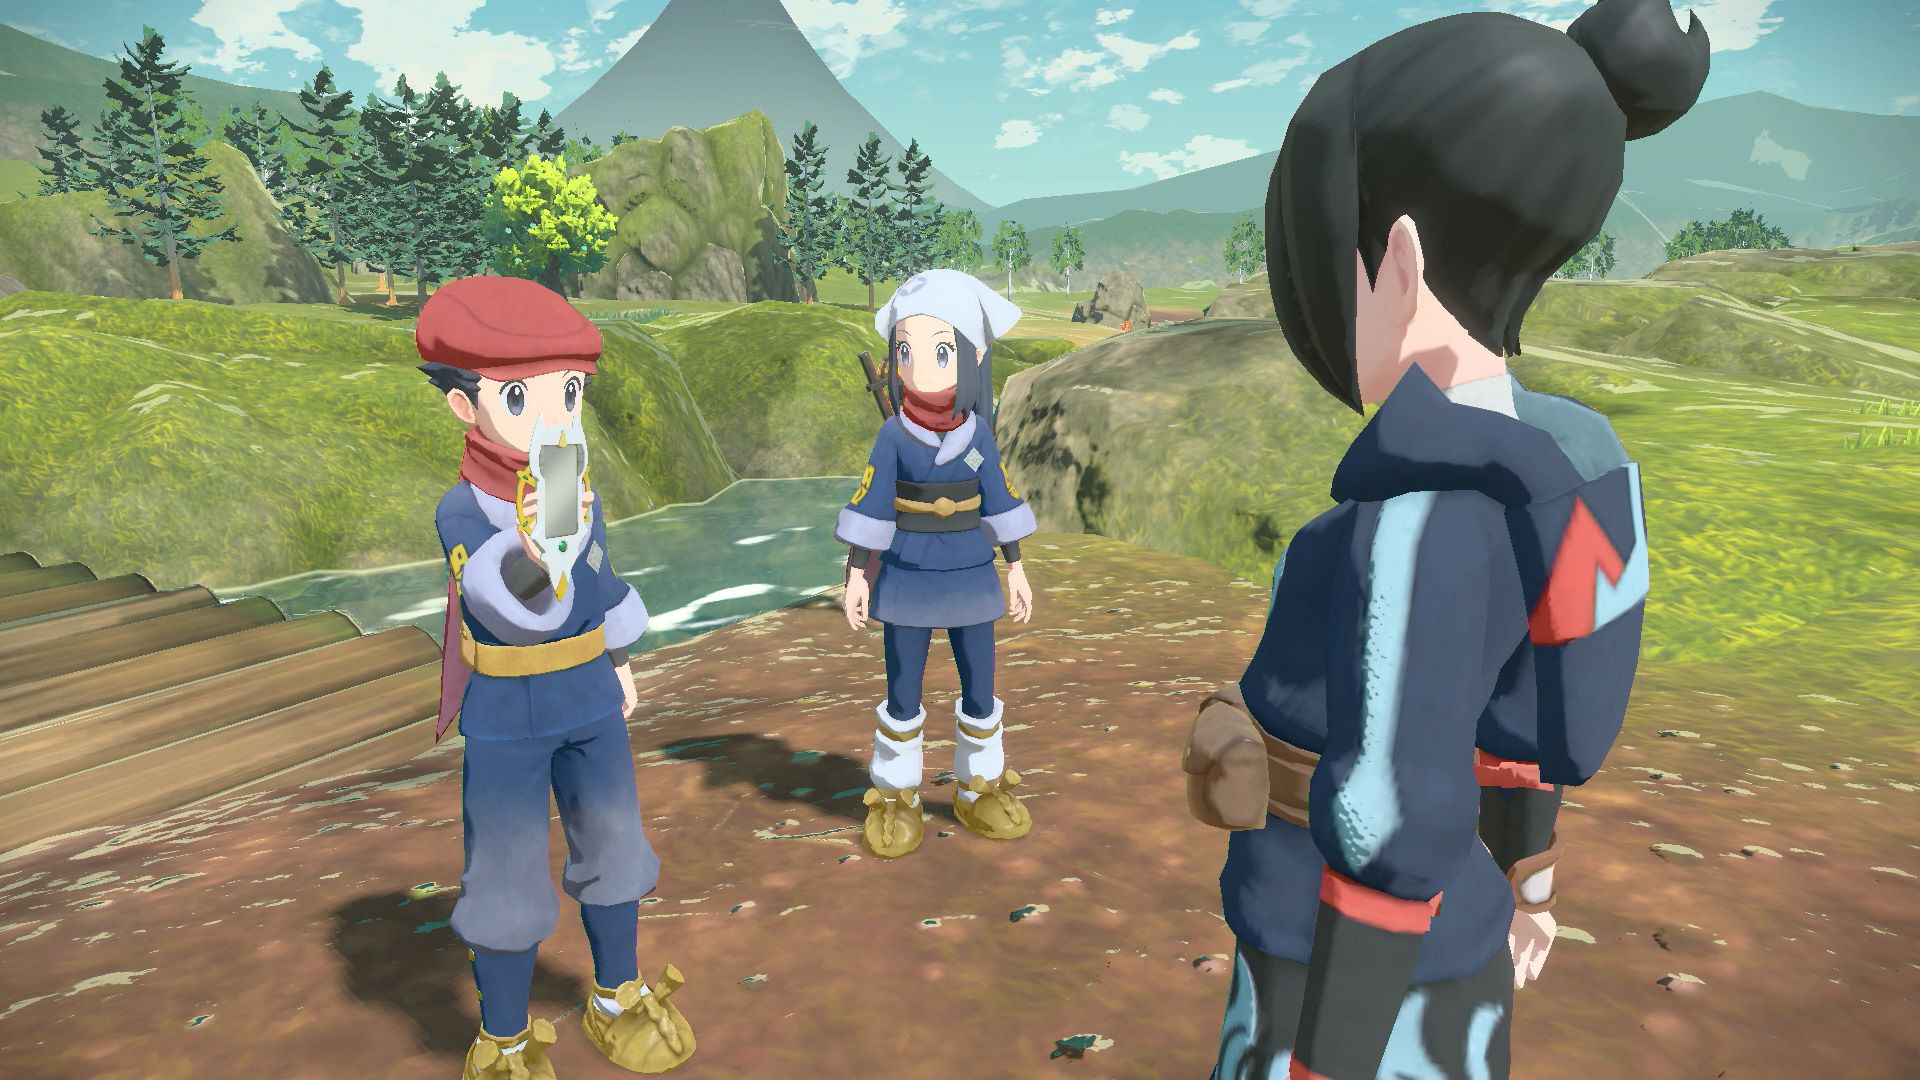 Pokemon Legends Arceus first-person mode lets you explore the world from  close up